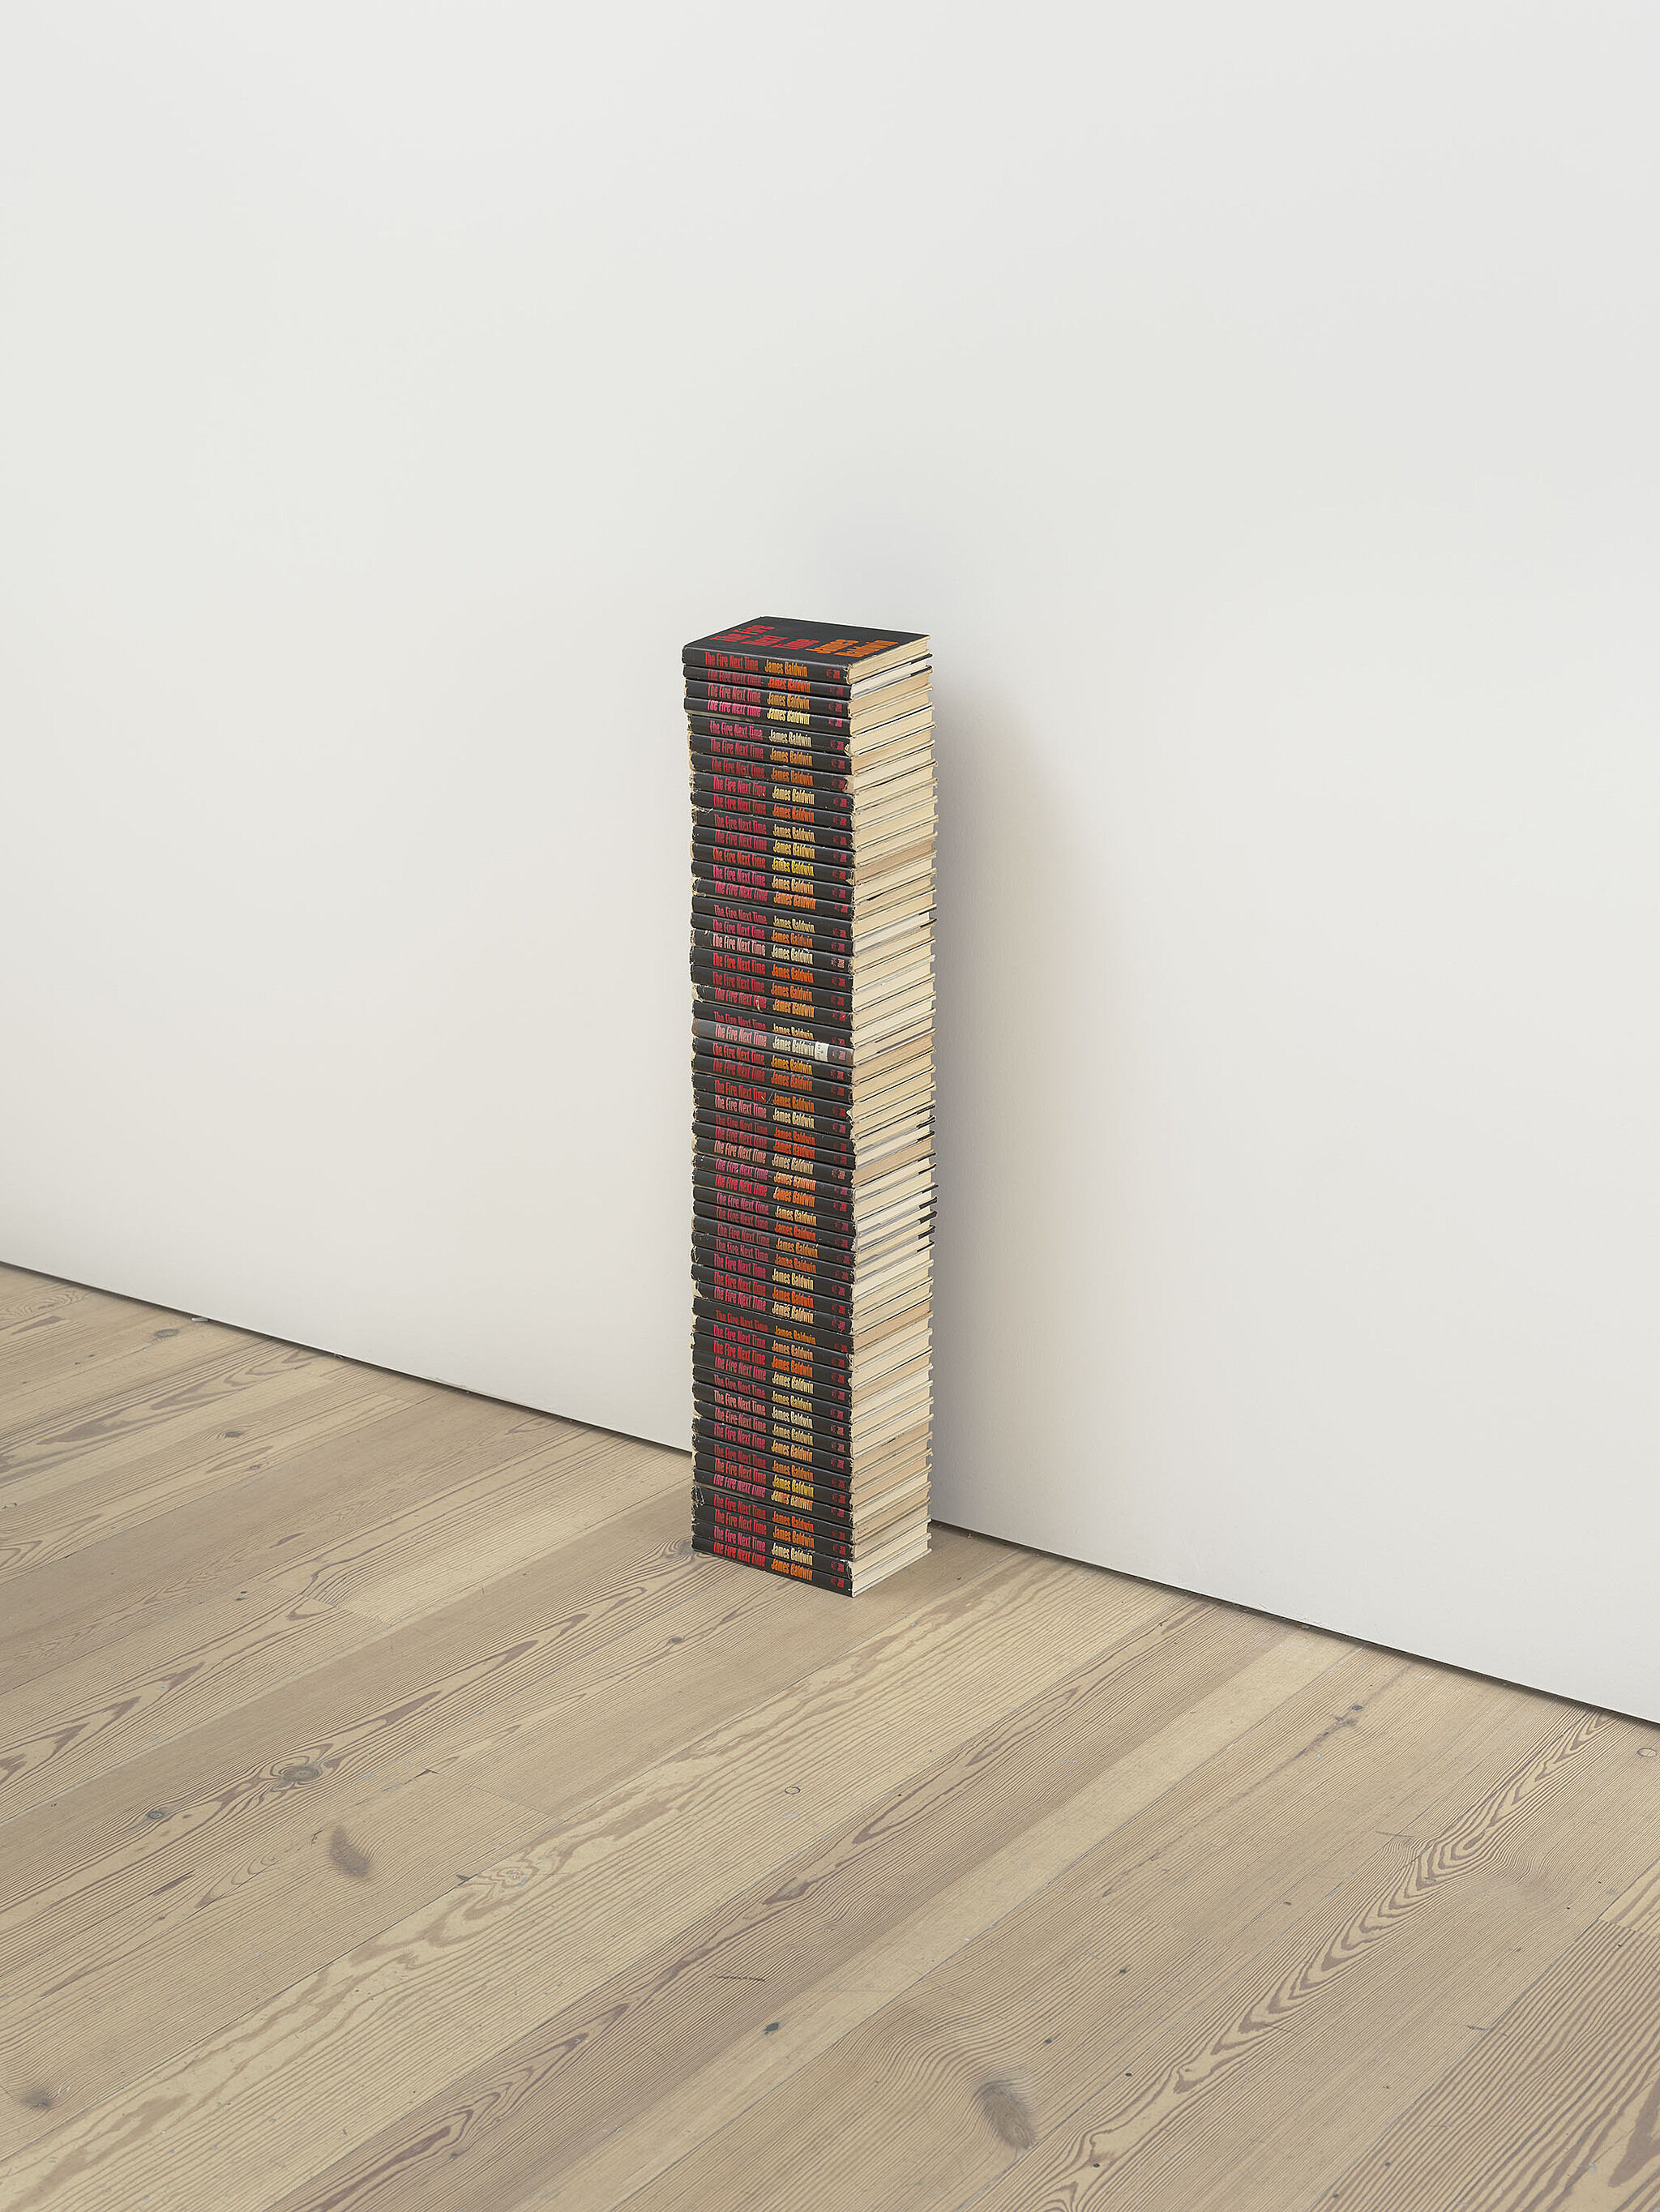 An image of a stack of books